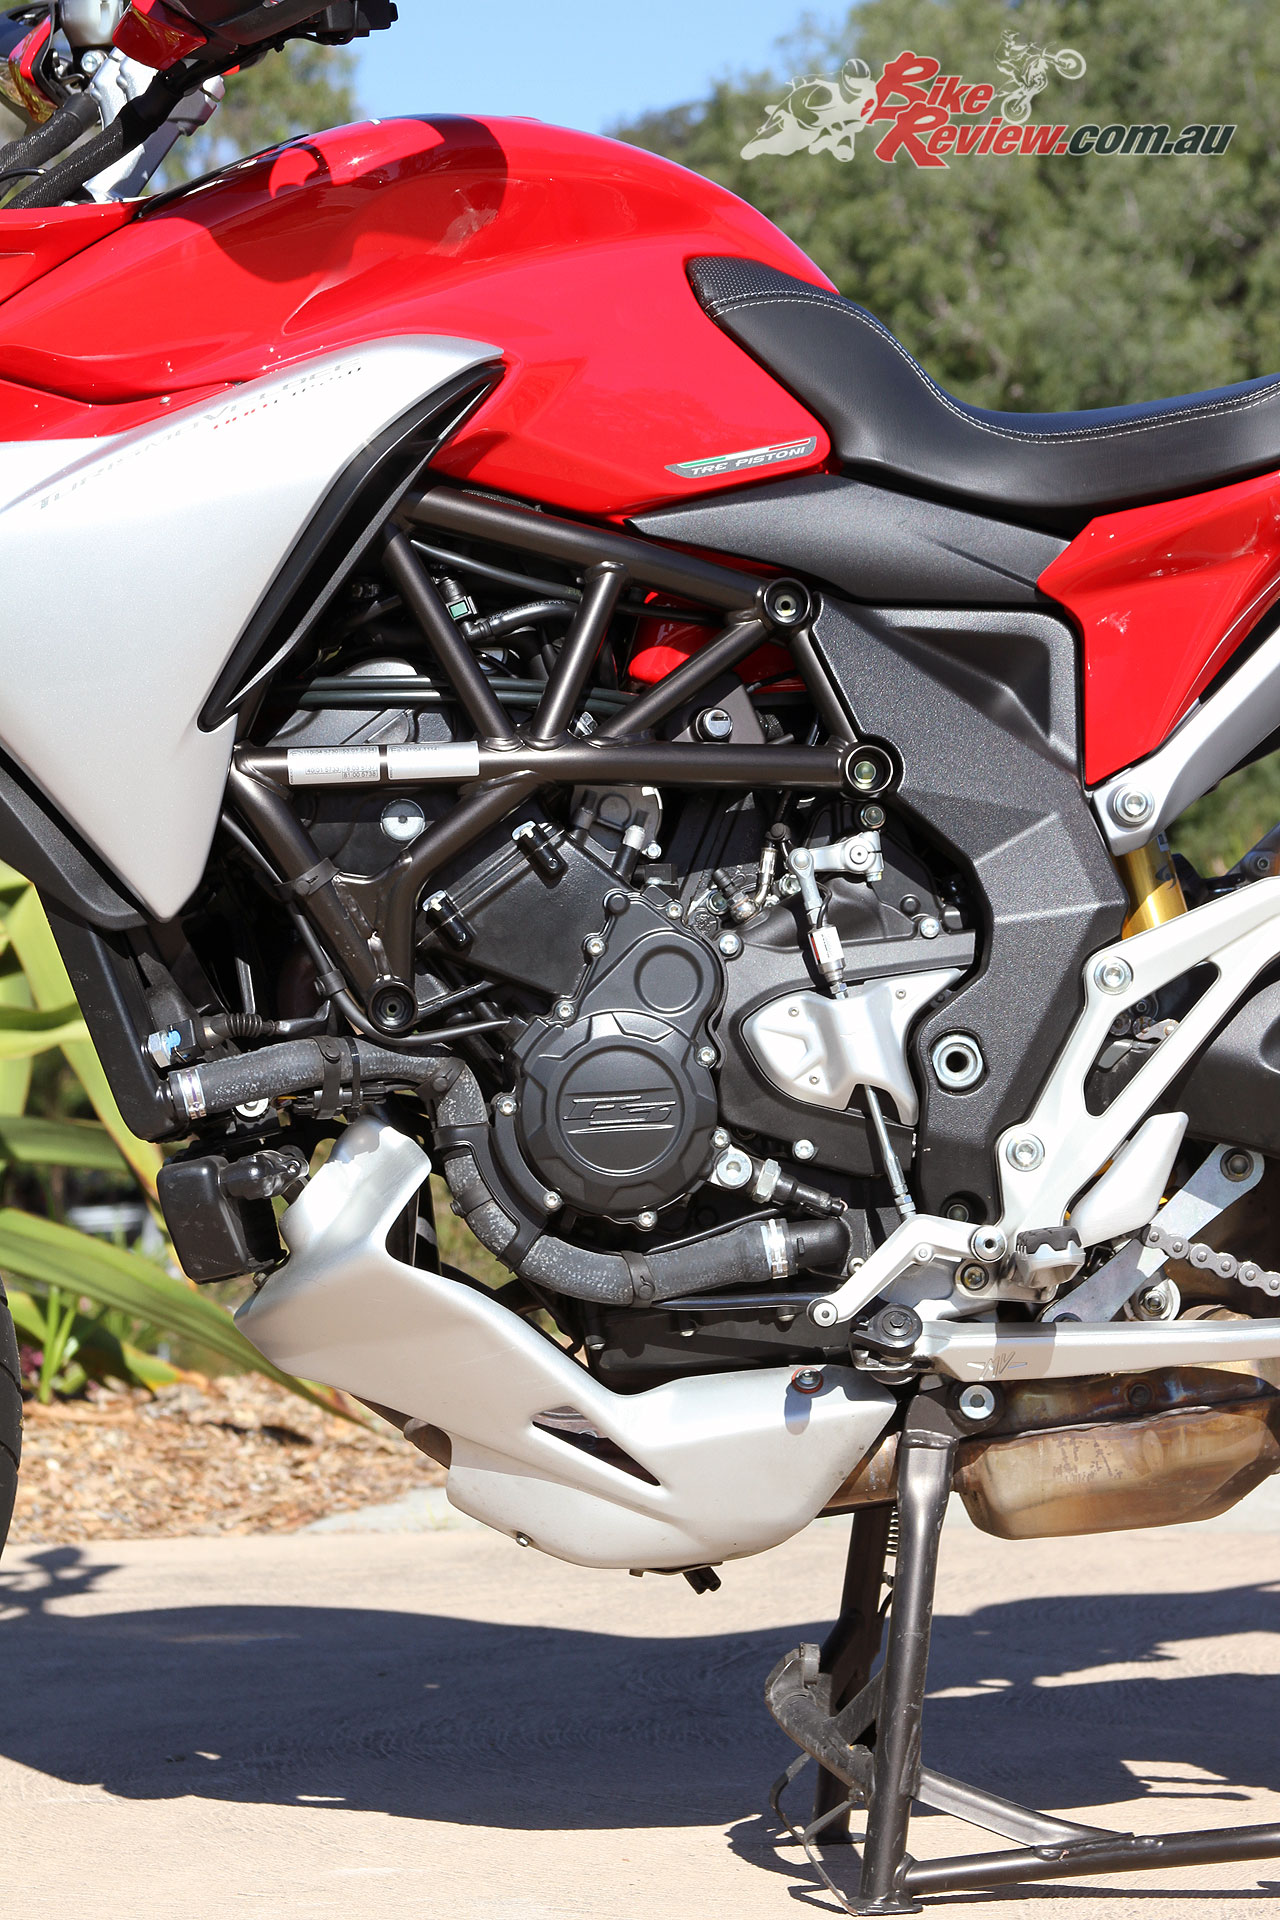 The torquey triple-cylinder offers a huge usable rpm range, with relatively tall gearing that is backed up by strong power and instant throttle response throughout